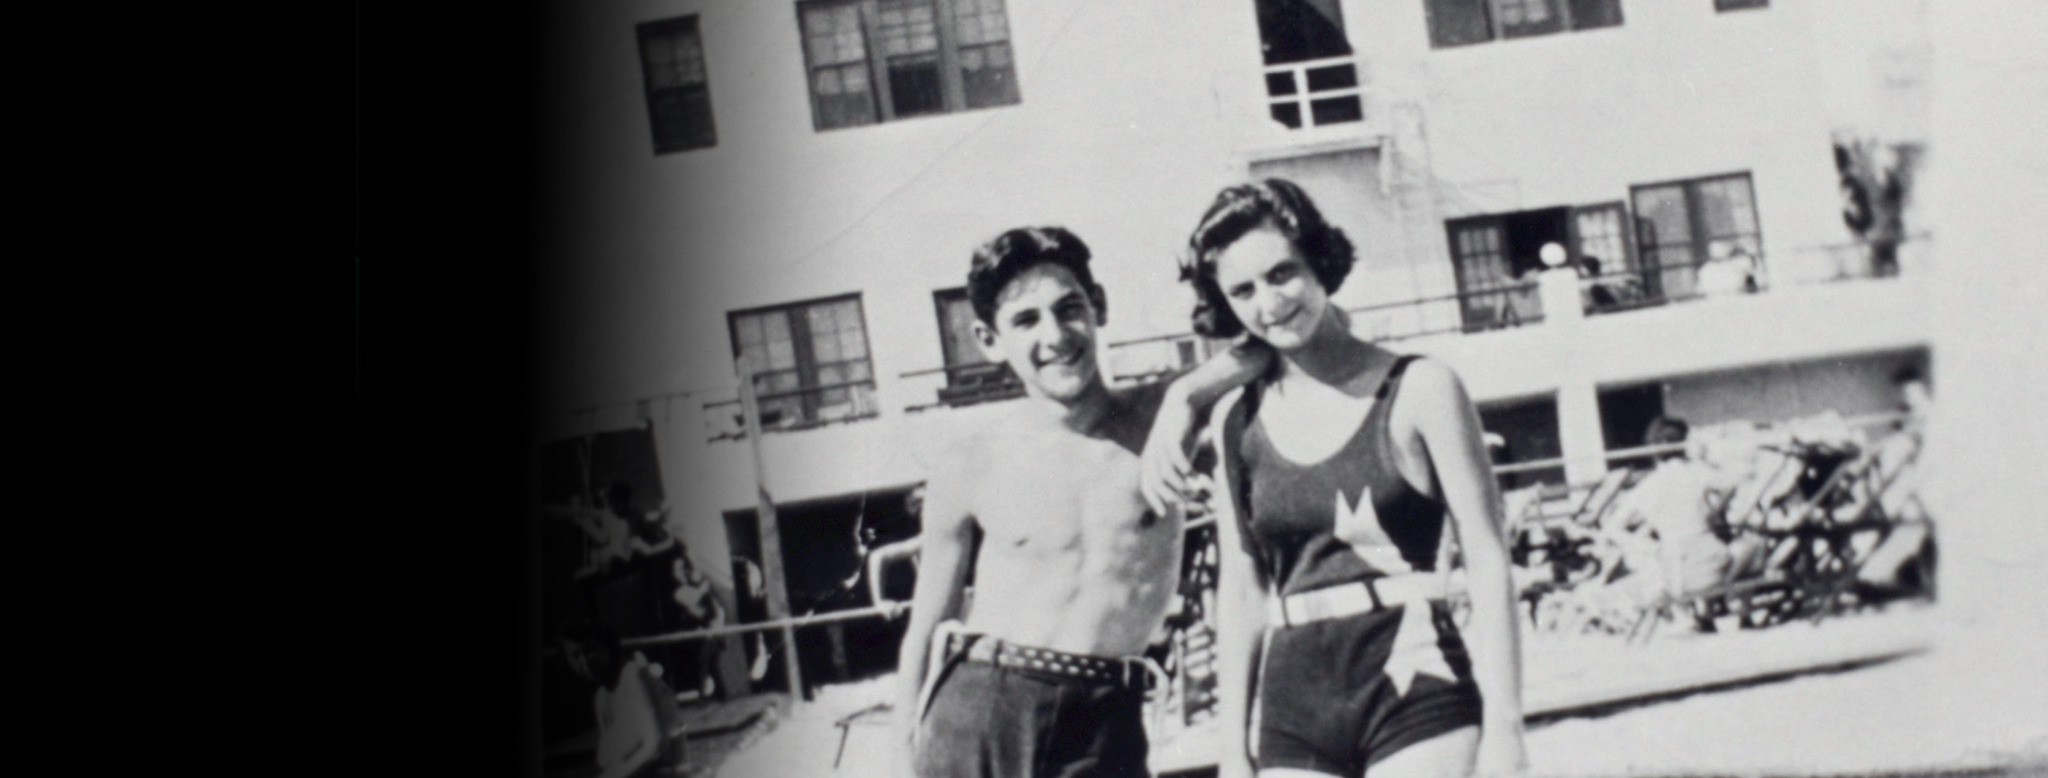 Leonard Bernstein and Beatrice Gordon at a swimming pool, ca. 1930s. Photo courtesy of the Library of Congress, Music Division.